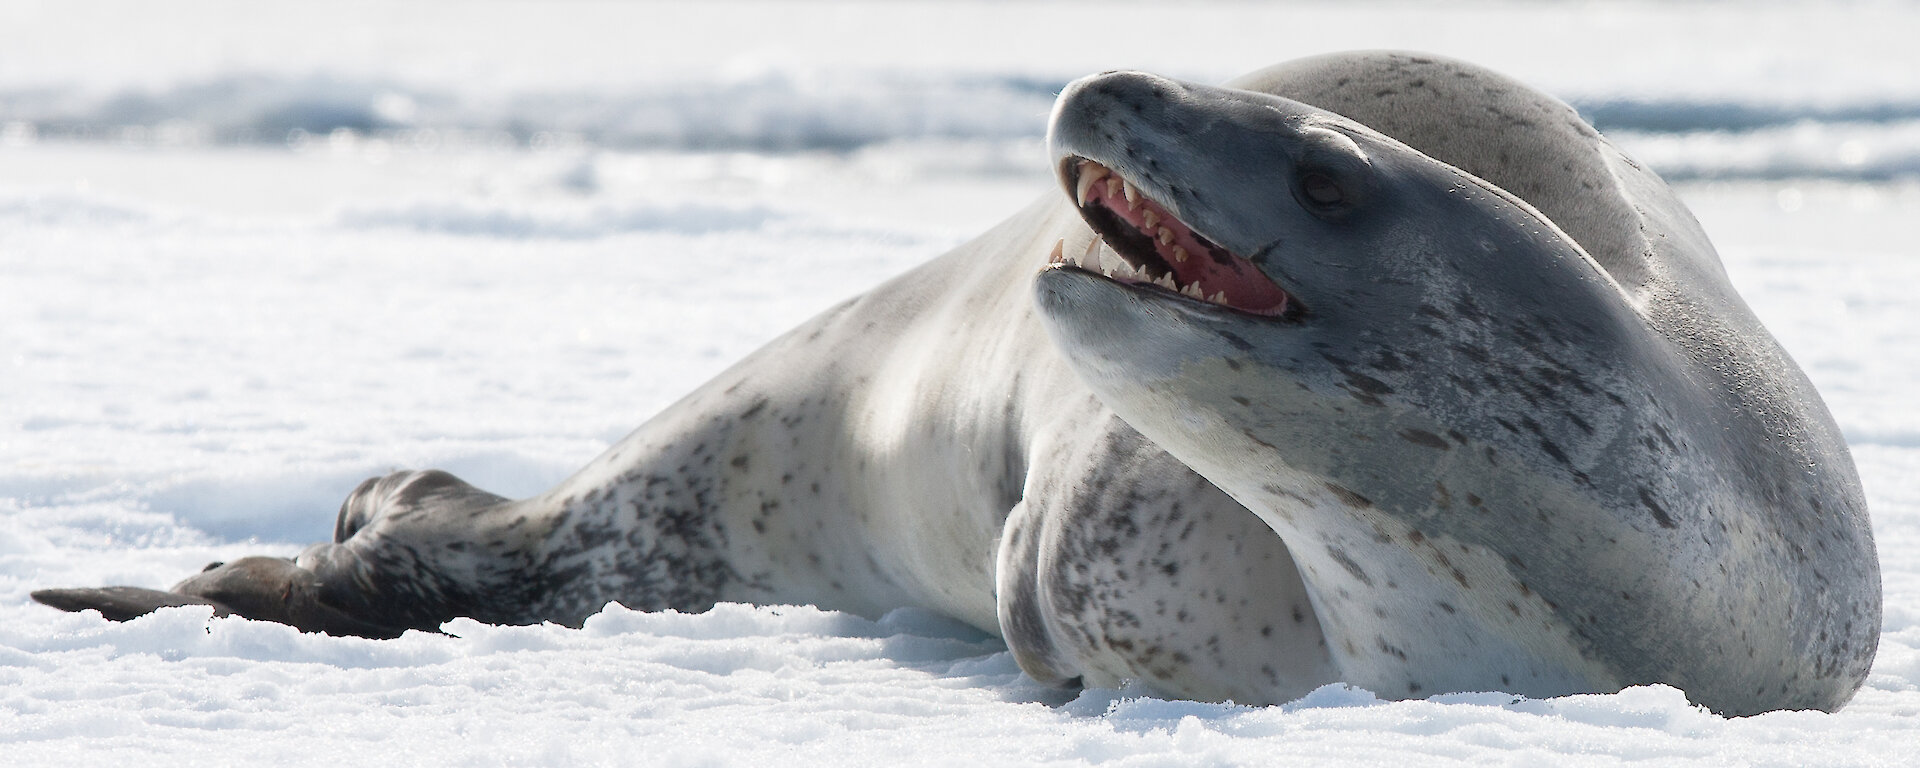 Leopard seal resting on the sea ice